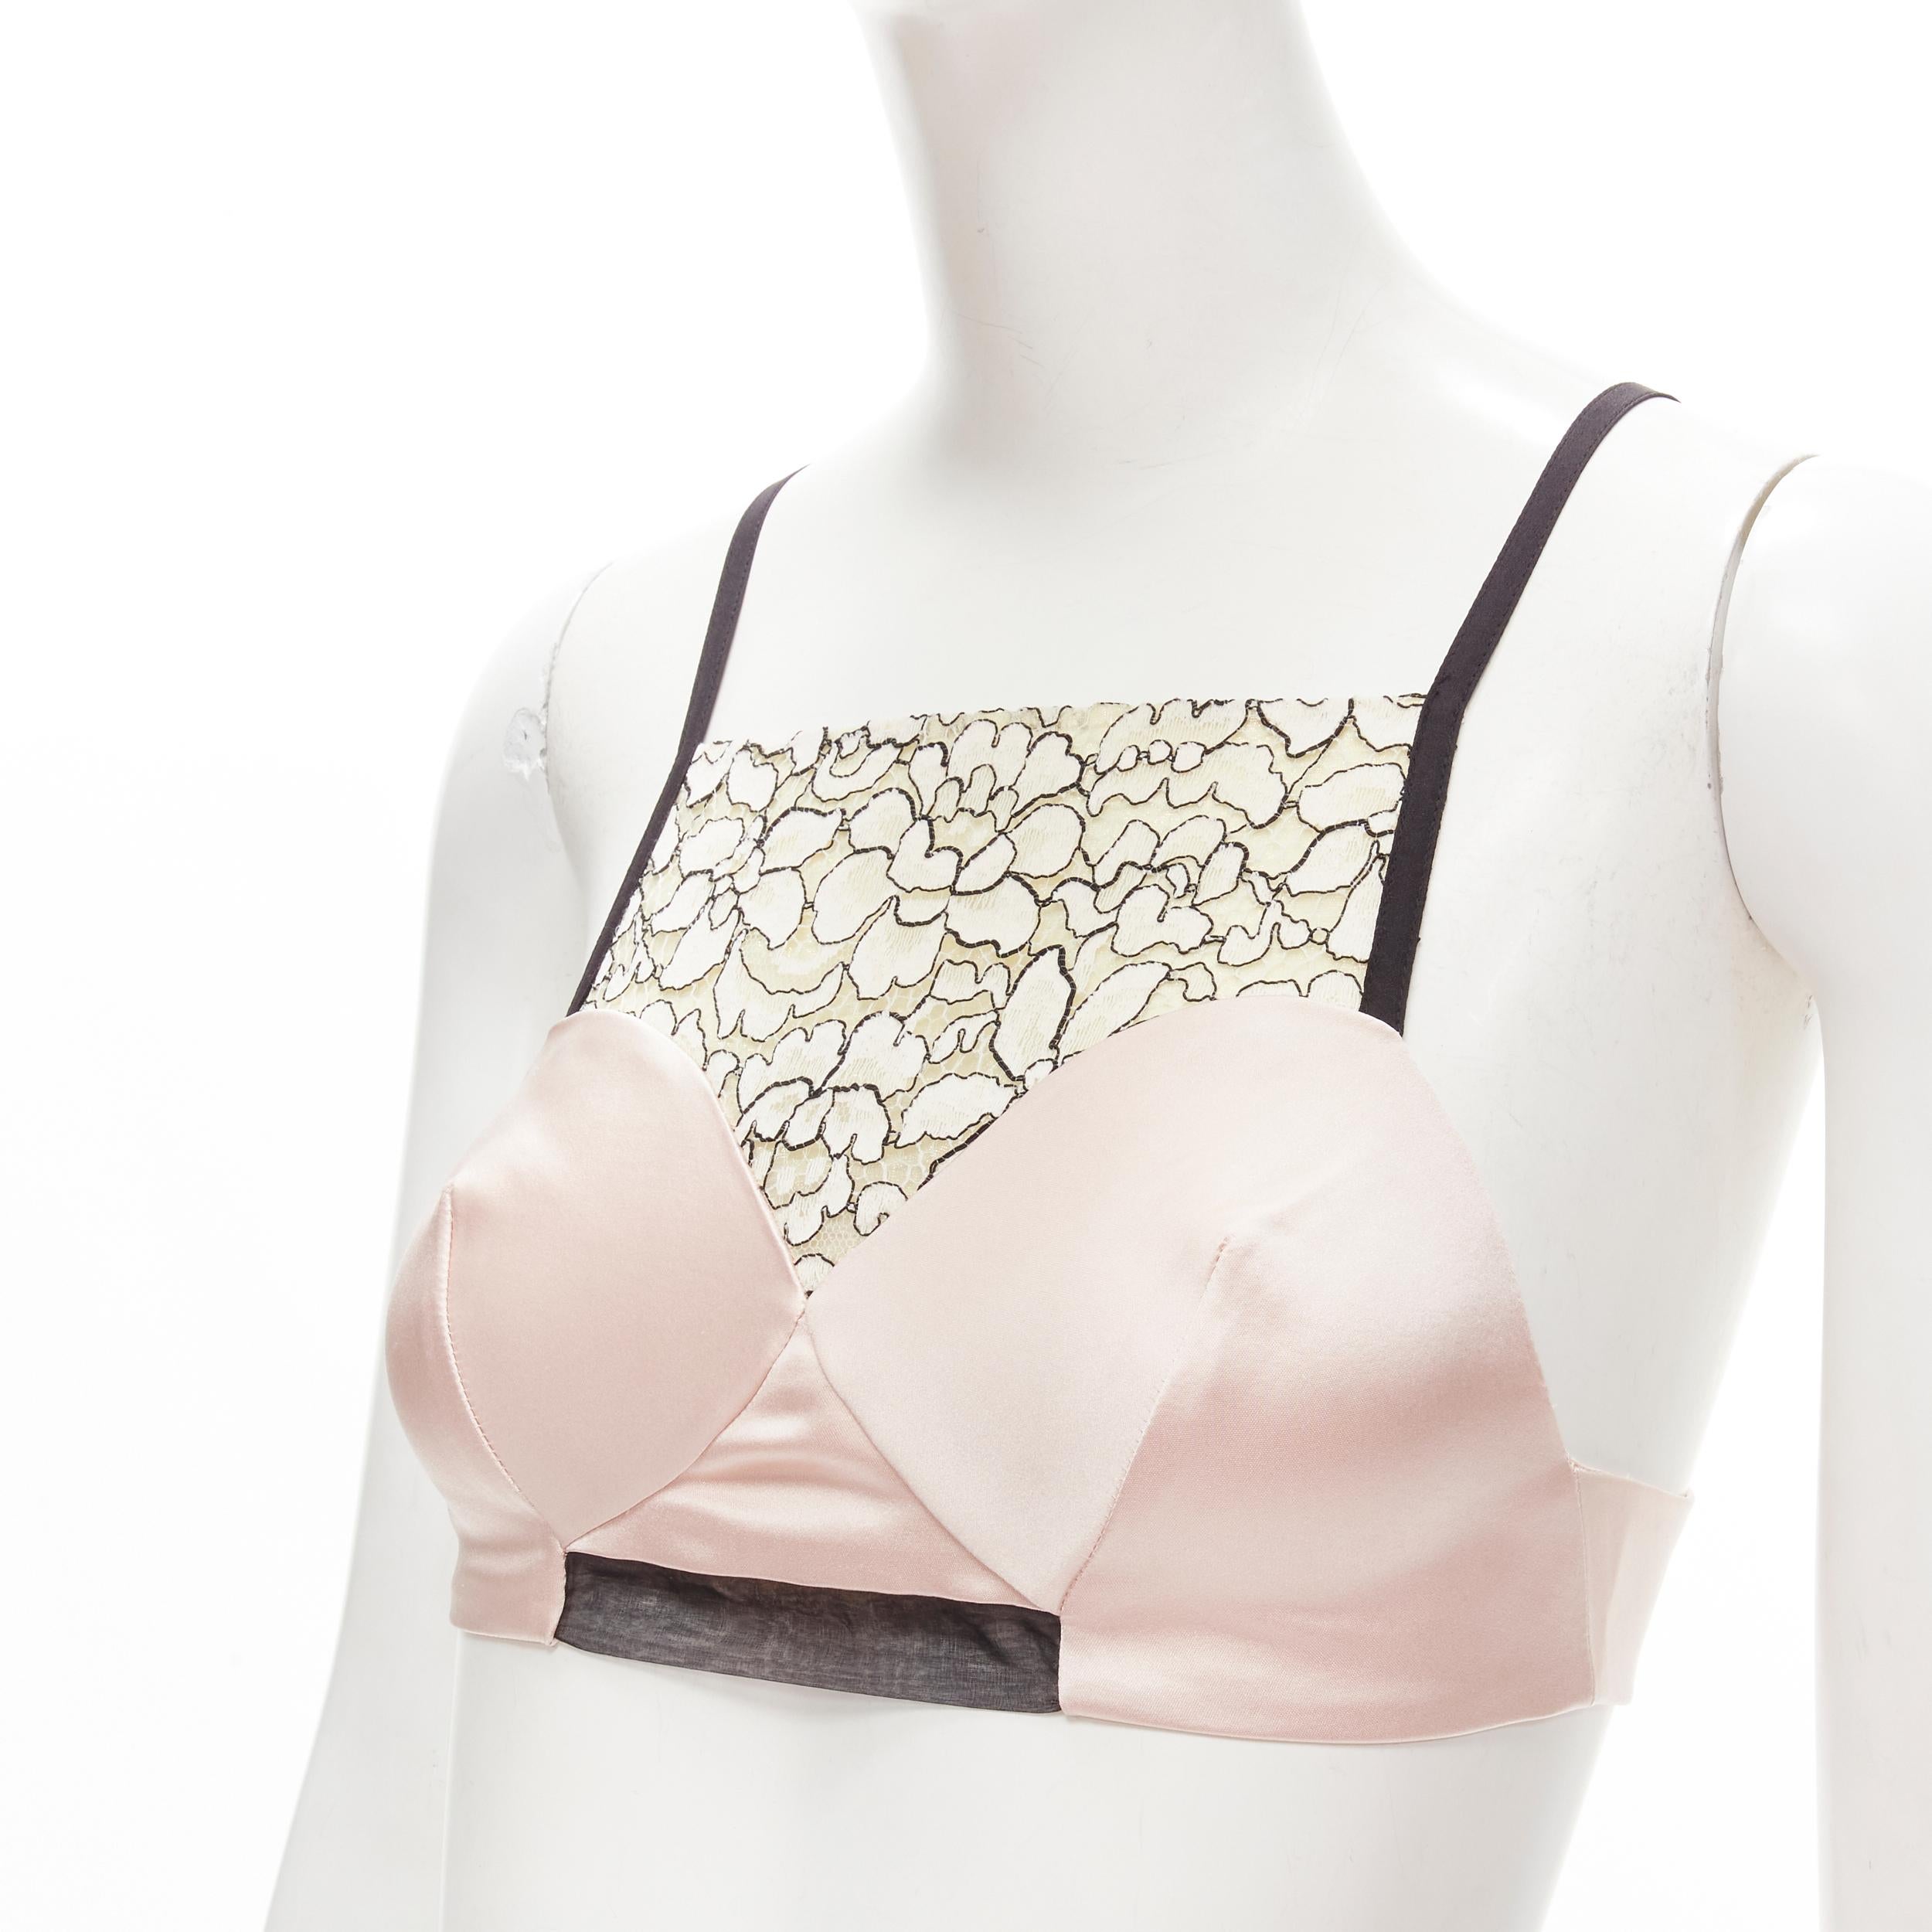 CHRISTIAN DIOR Raf Simons light pink lace panel bustier bralette top FR36 XS
Brand: Christian Dior
Designer: Raf Simons
Material: Silk
Color: Pink
Pattern: Solid
Closure: Hook & Eye
Extra Detail: Light pink bralette with cream metallic sheer lace